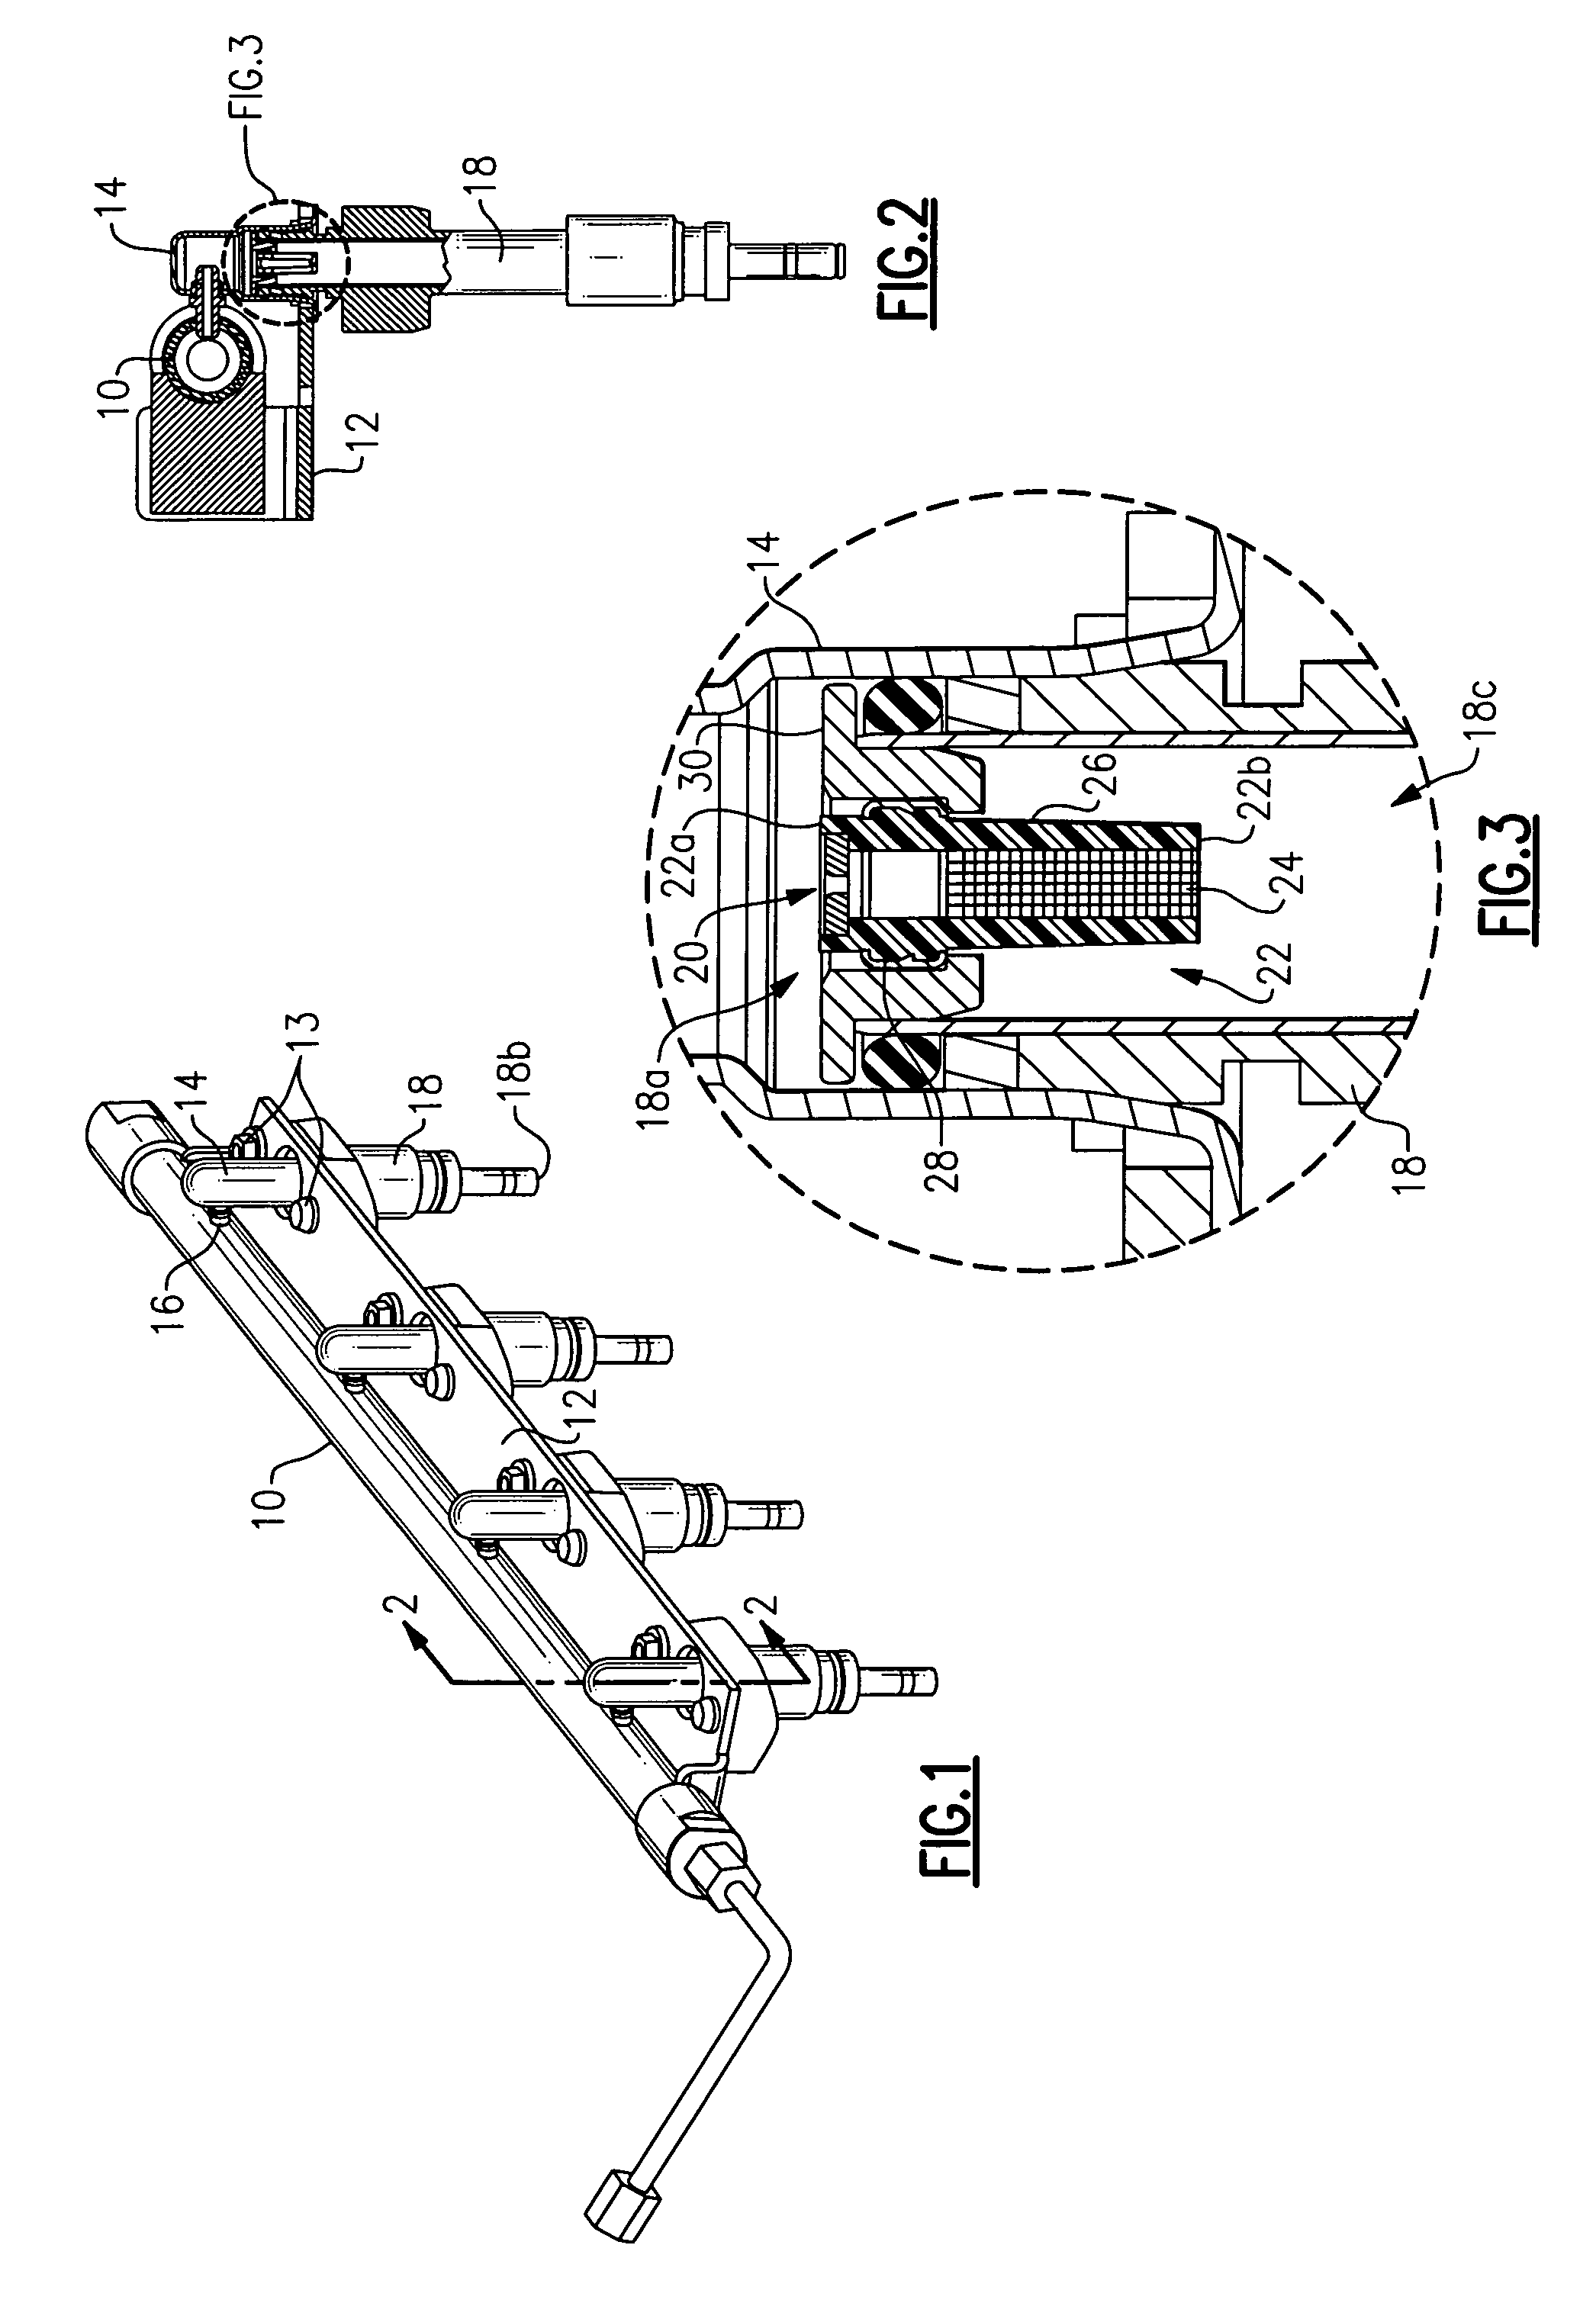 Injector fuel filter with built-in orifice for flow restriction